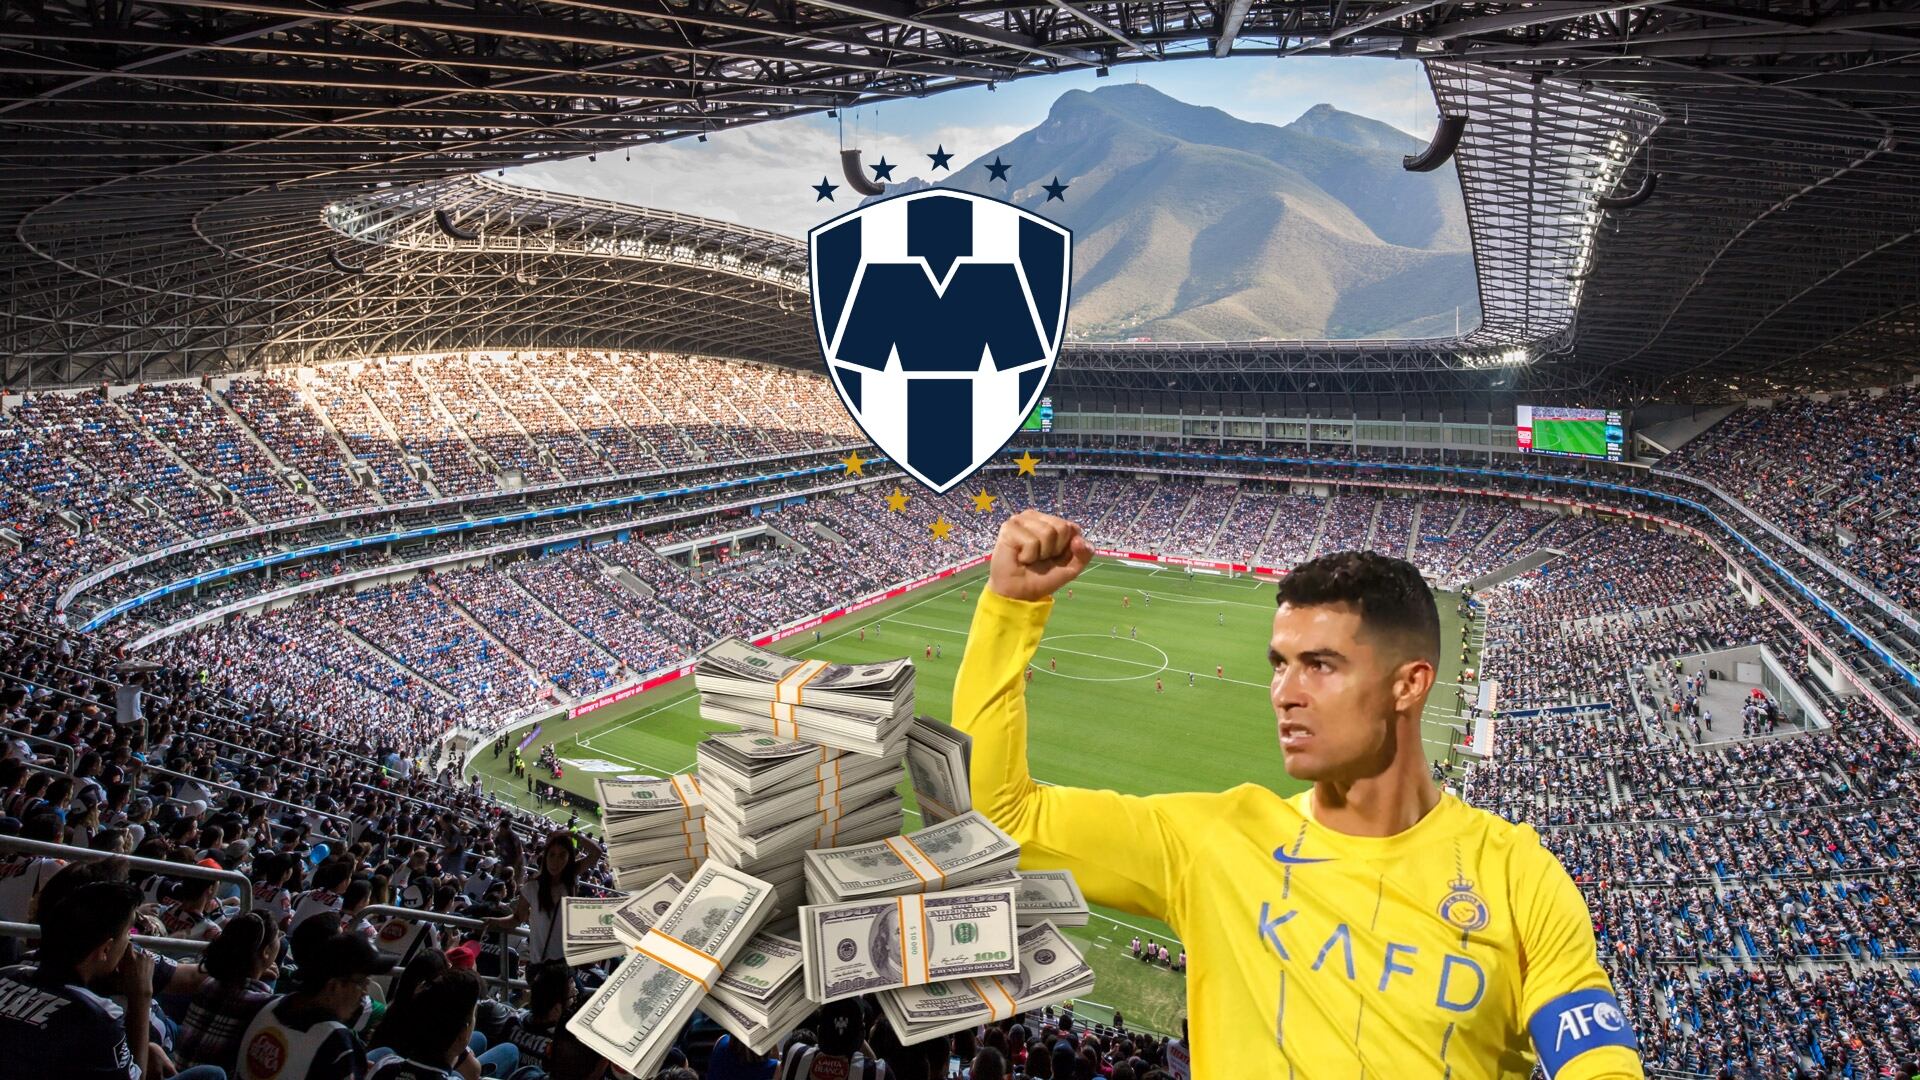 Best paid in Mexico, Cristiano's possible salary if he decides to join Rayados to play Club World Cup